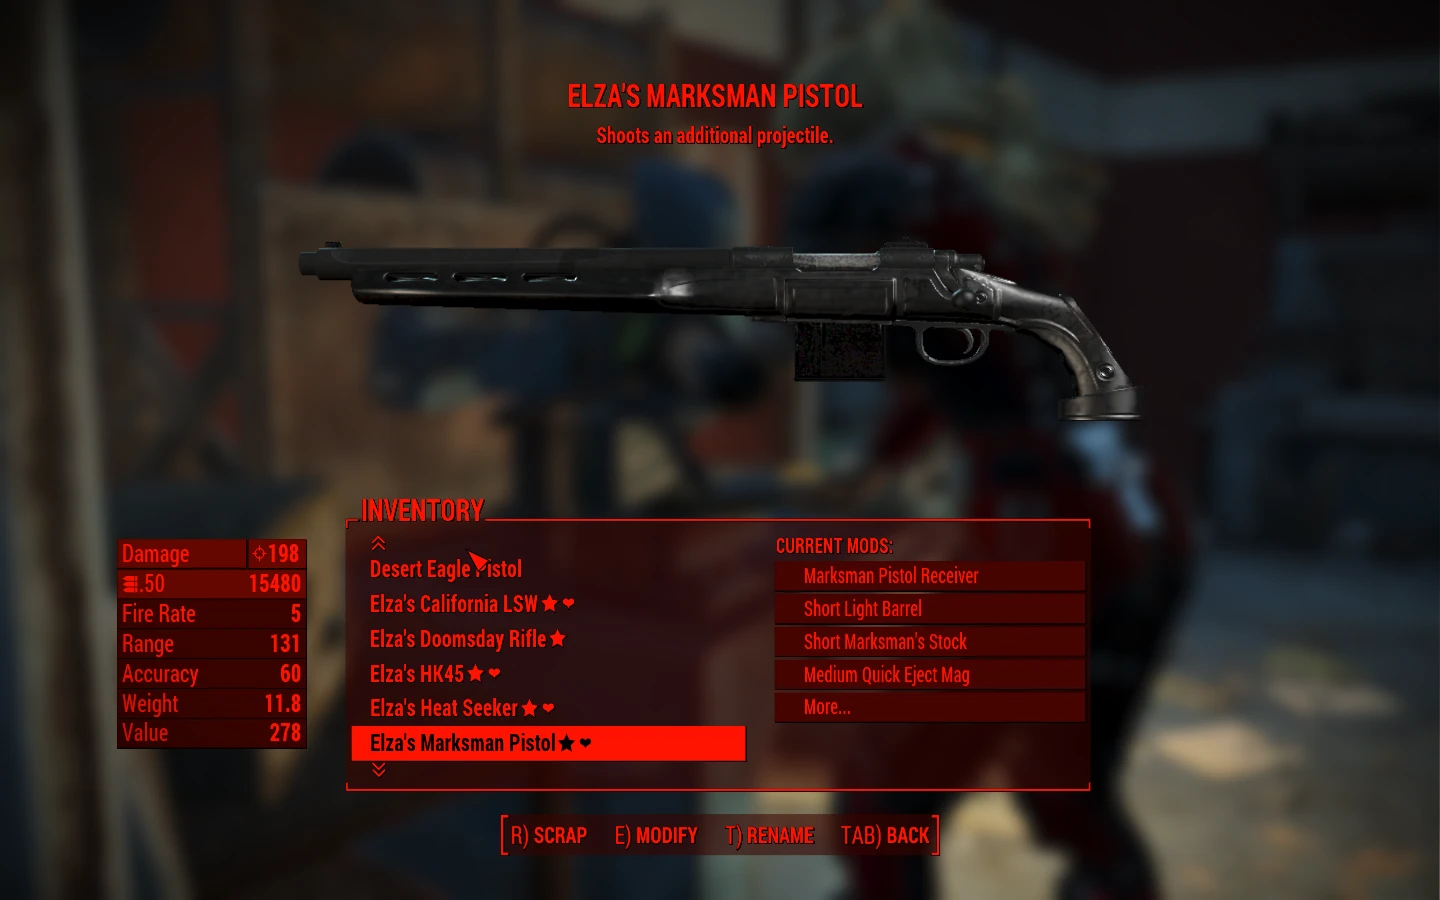 Visible weapons для fallout 4 фото 109